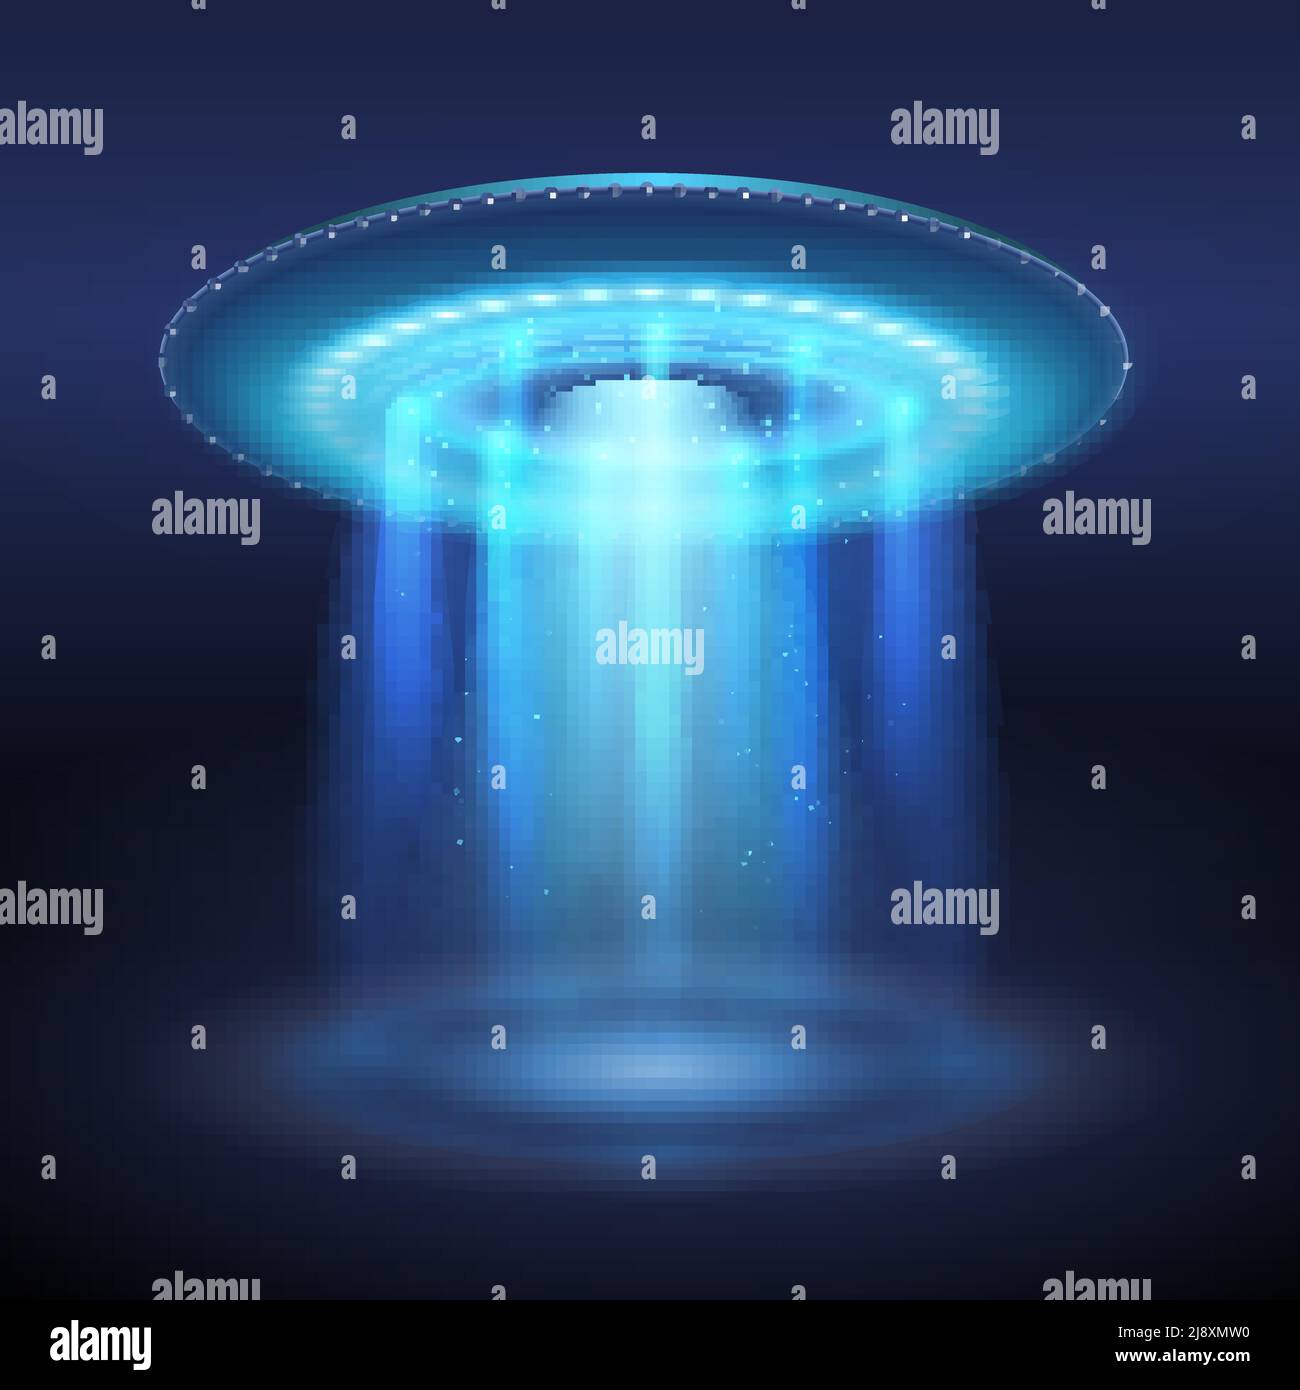 Illuminated ufo space ship with blue light portal on dark background realistic vector illustration Stock Vector